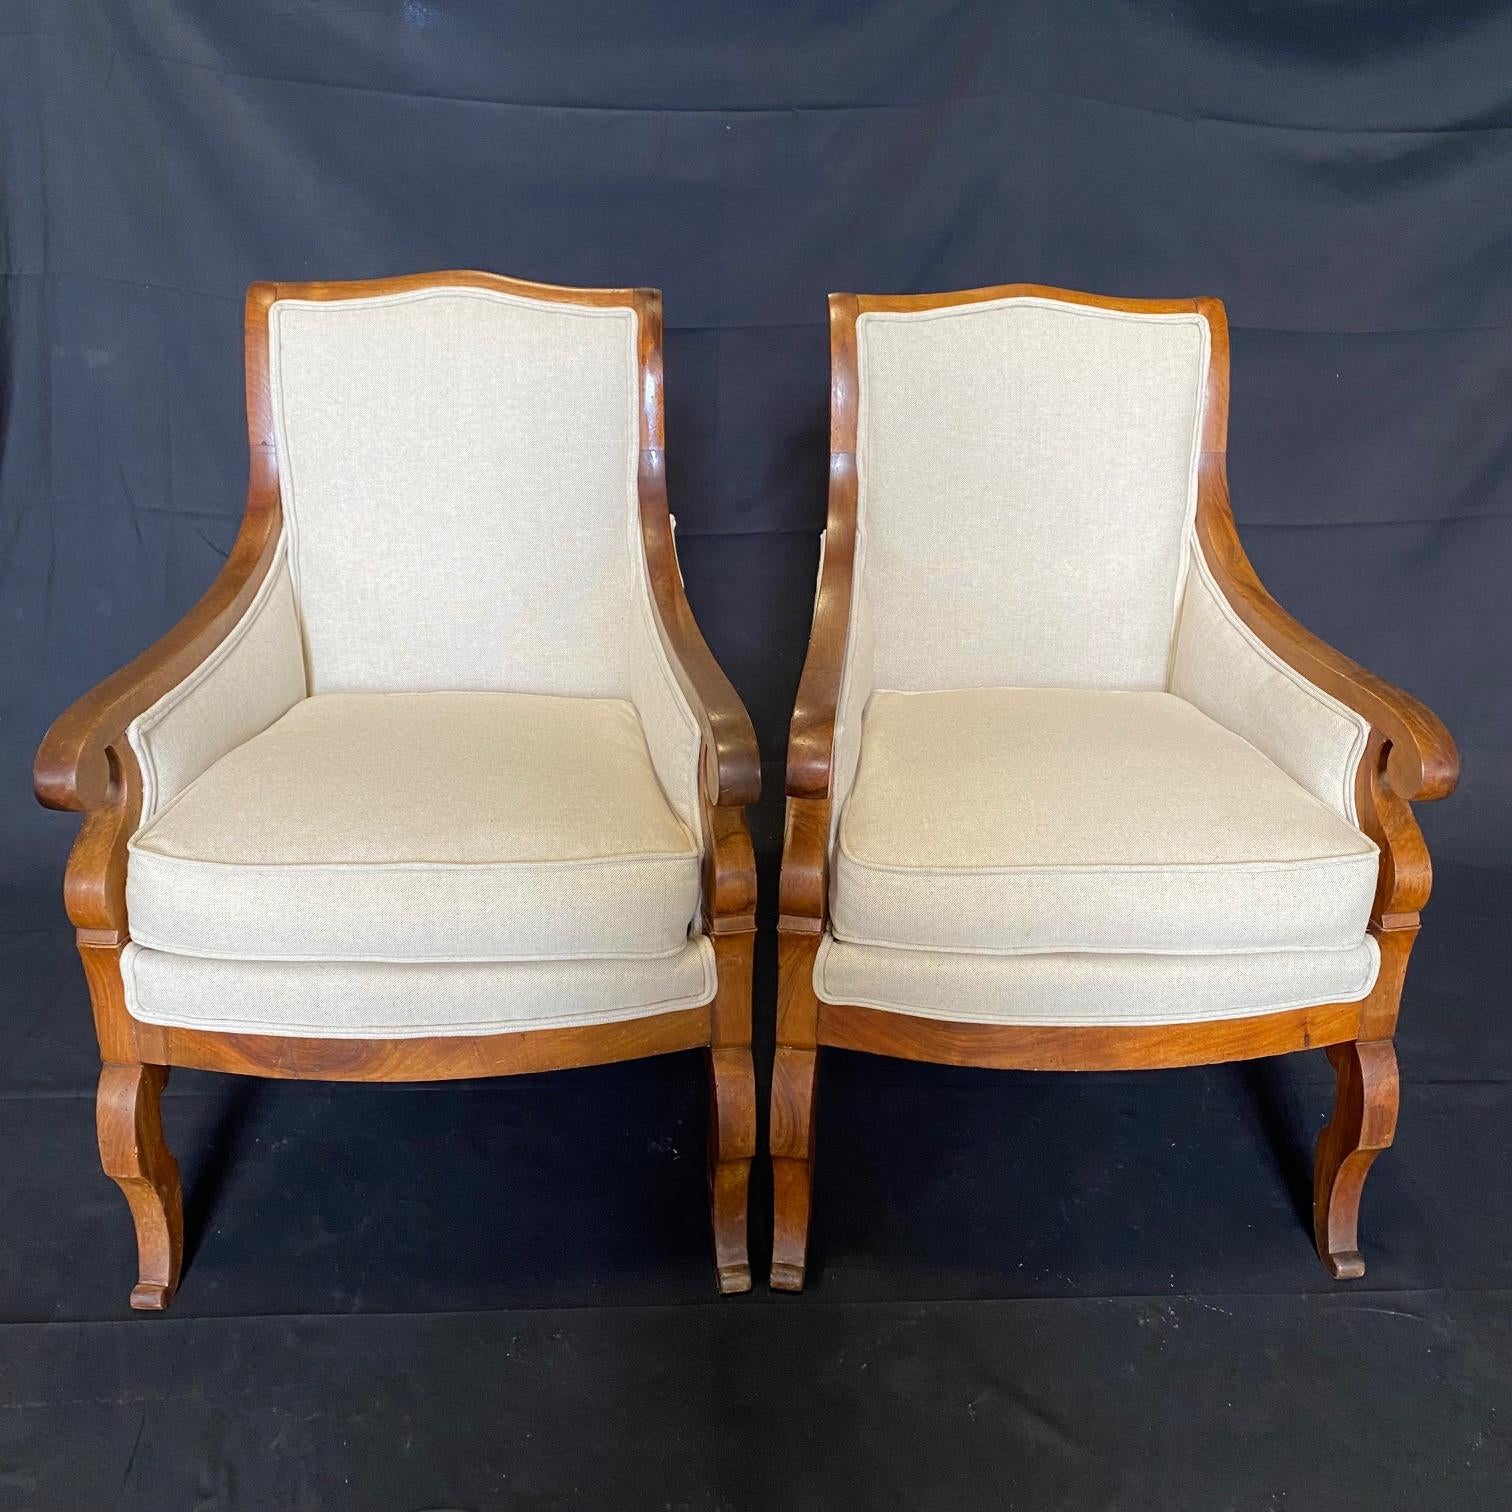 Pair of antique French Empire walnut armchairs or bergères havingtailored framework accented by a subtly arched seat back and curved arm rests that terminate in a graceful joinery just above the beautifully carved legs. New upholstery in high